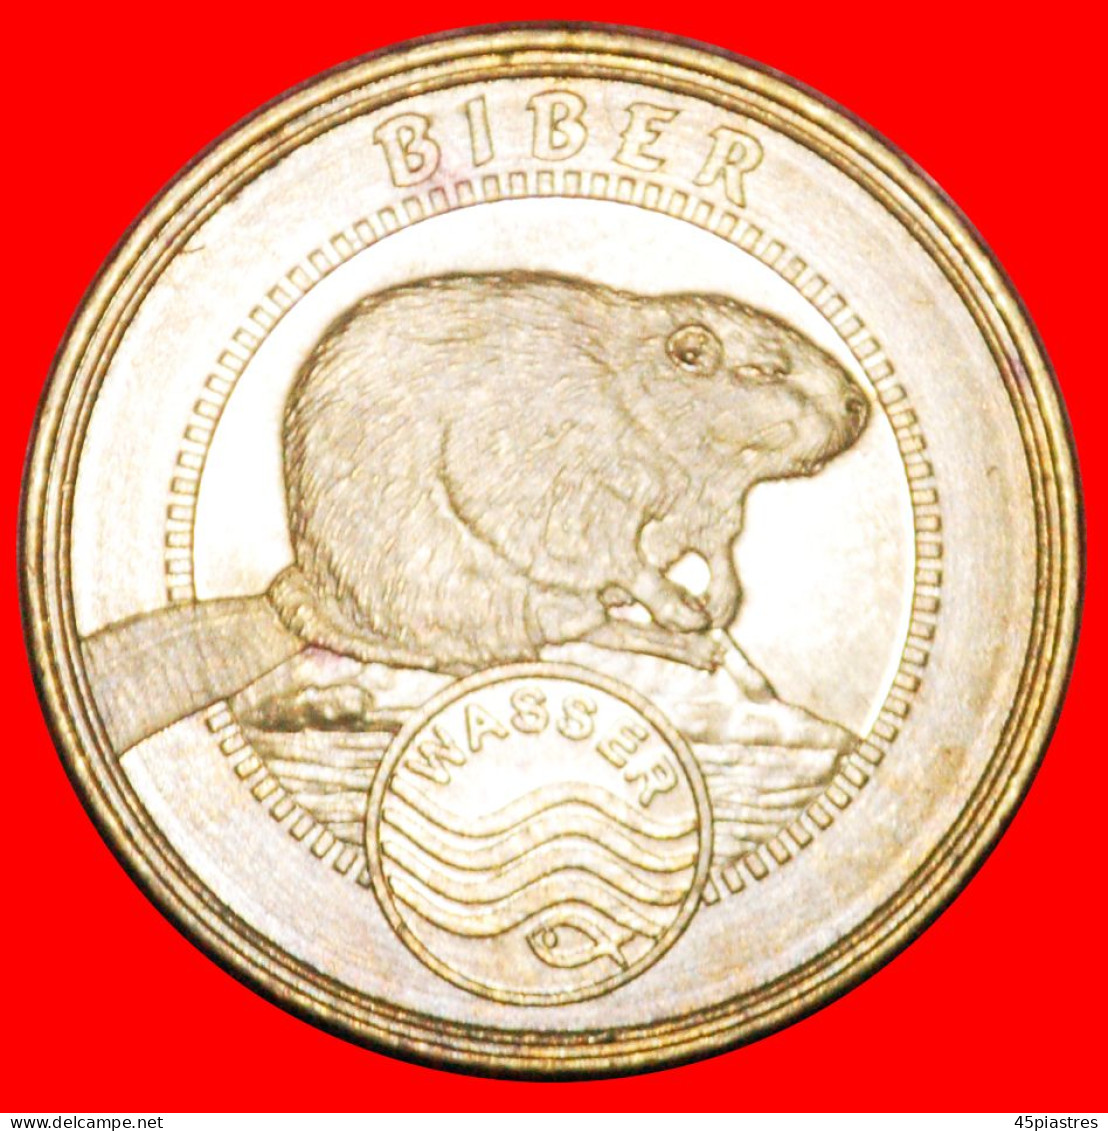 * BEAVER: AUSTRIA  WWF For Kids UNC MINT LUSTRE TO BE PUBLISHED! ·  LOW START · NO RESERVE! - Gewerbliche